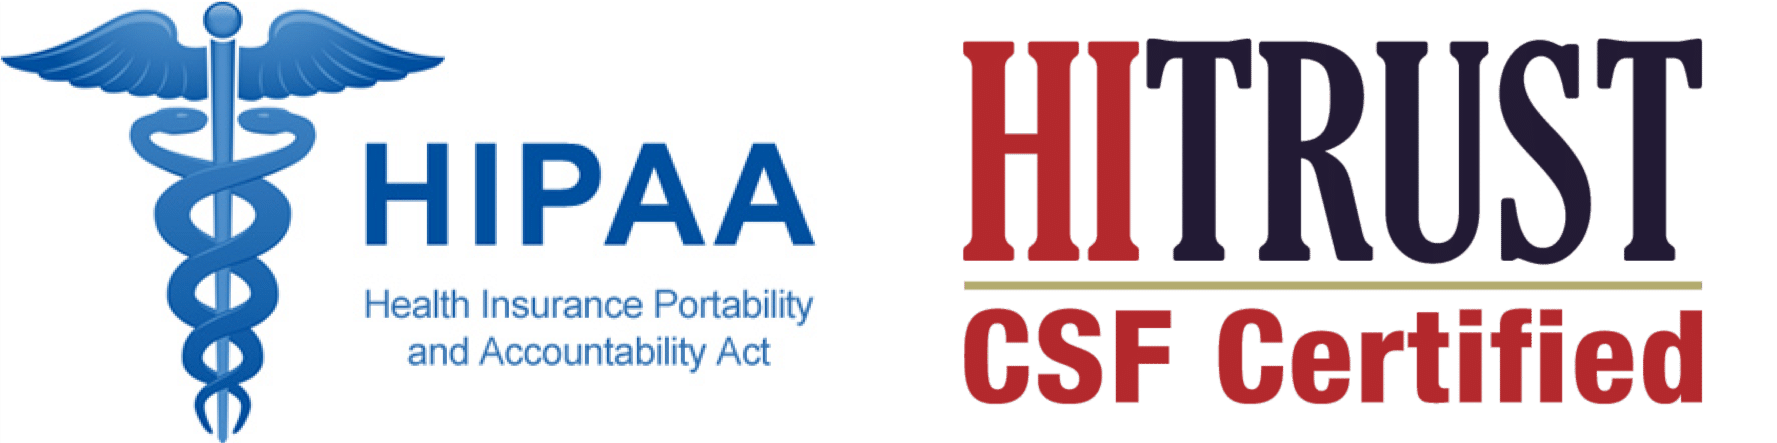 HIPAA-compliant, HITRUST certified, and secure.